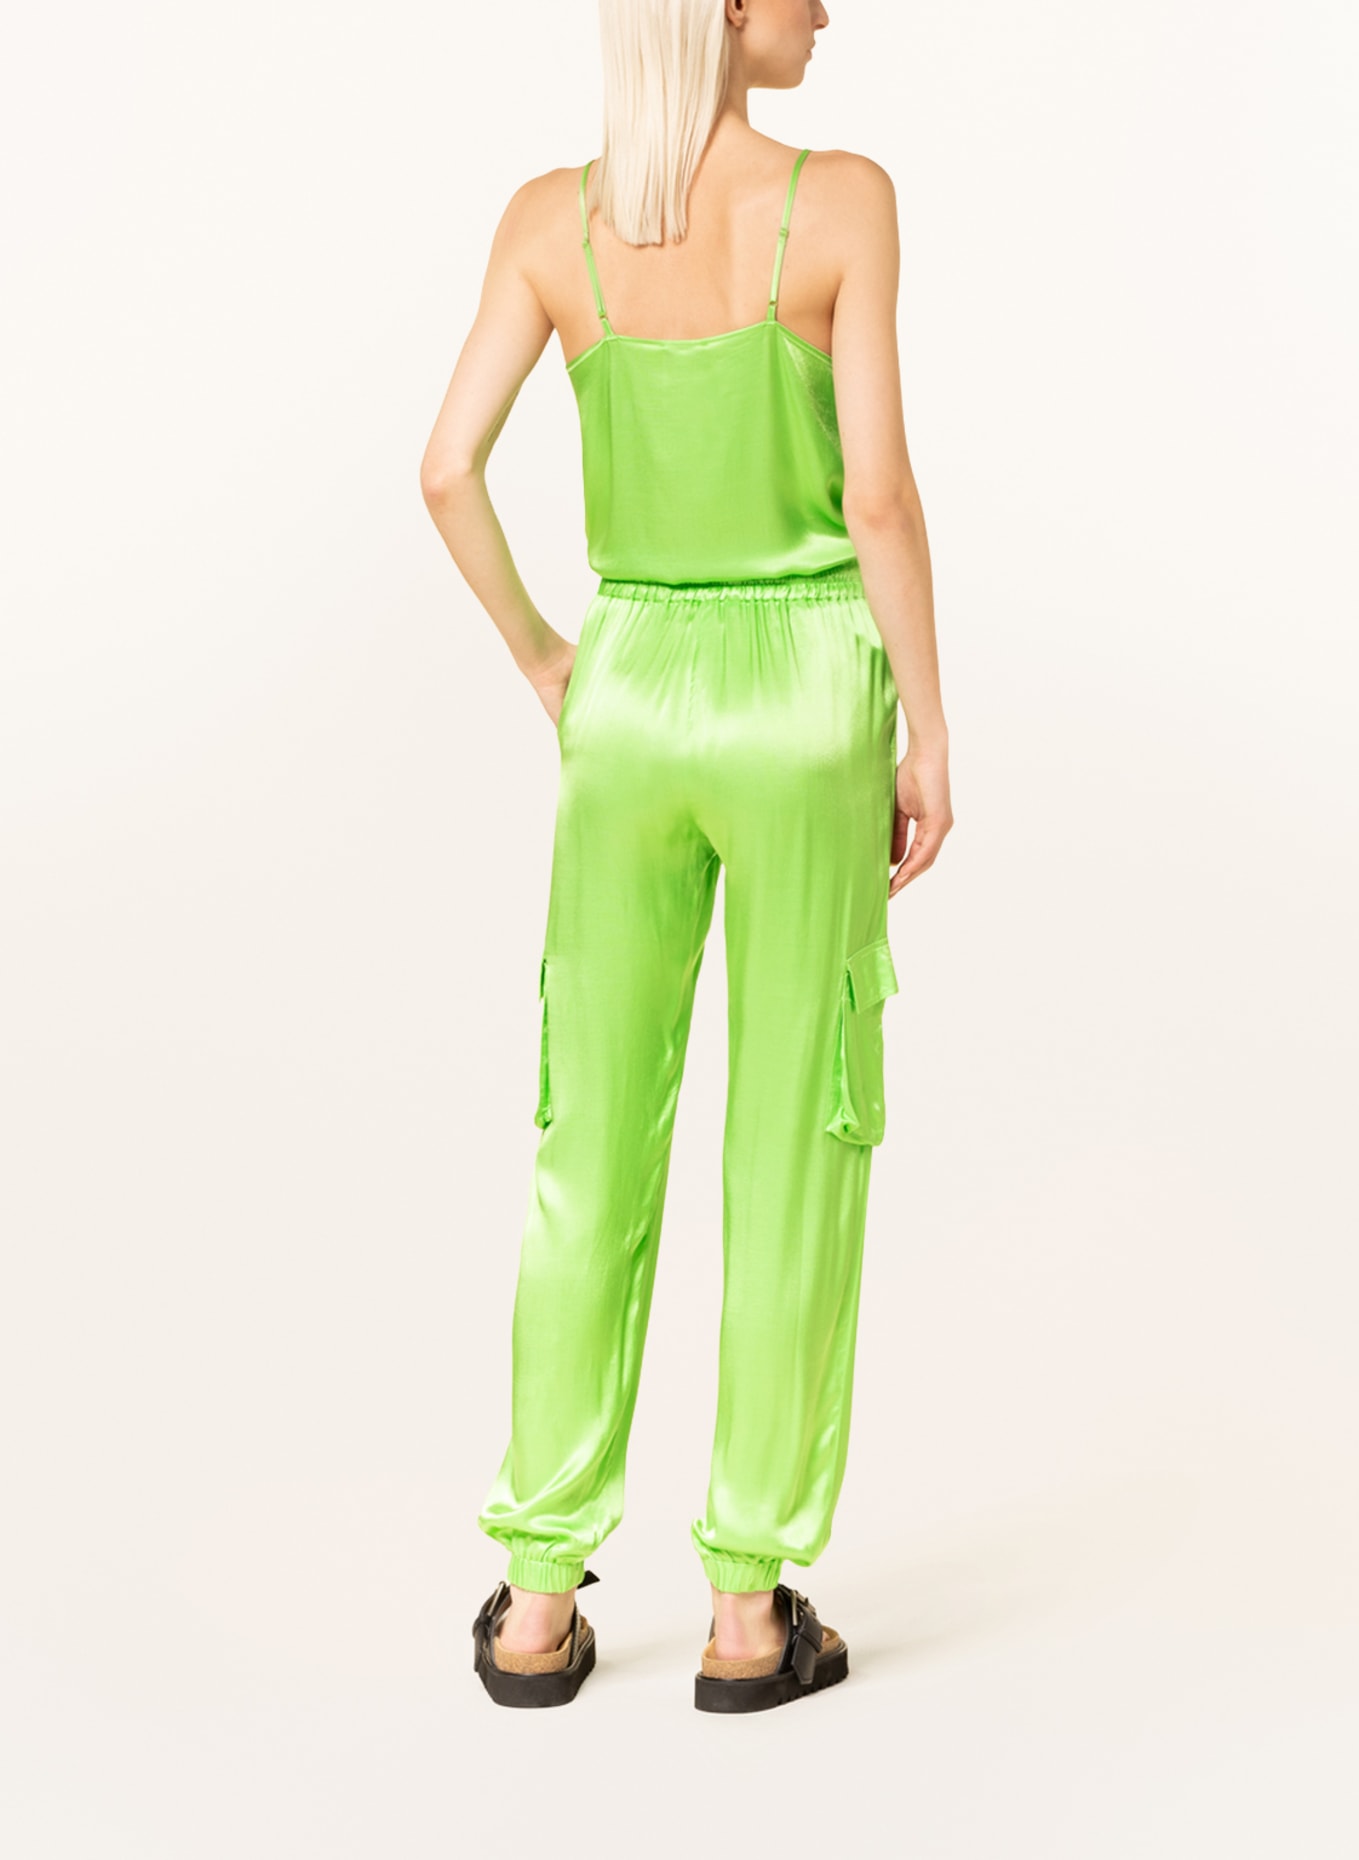 MRS & HUGS Cargo pants made of satin, Color: NEON GREEN (Image 3)